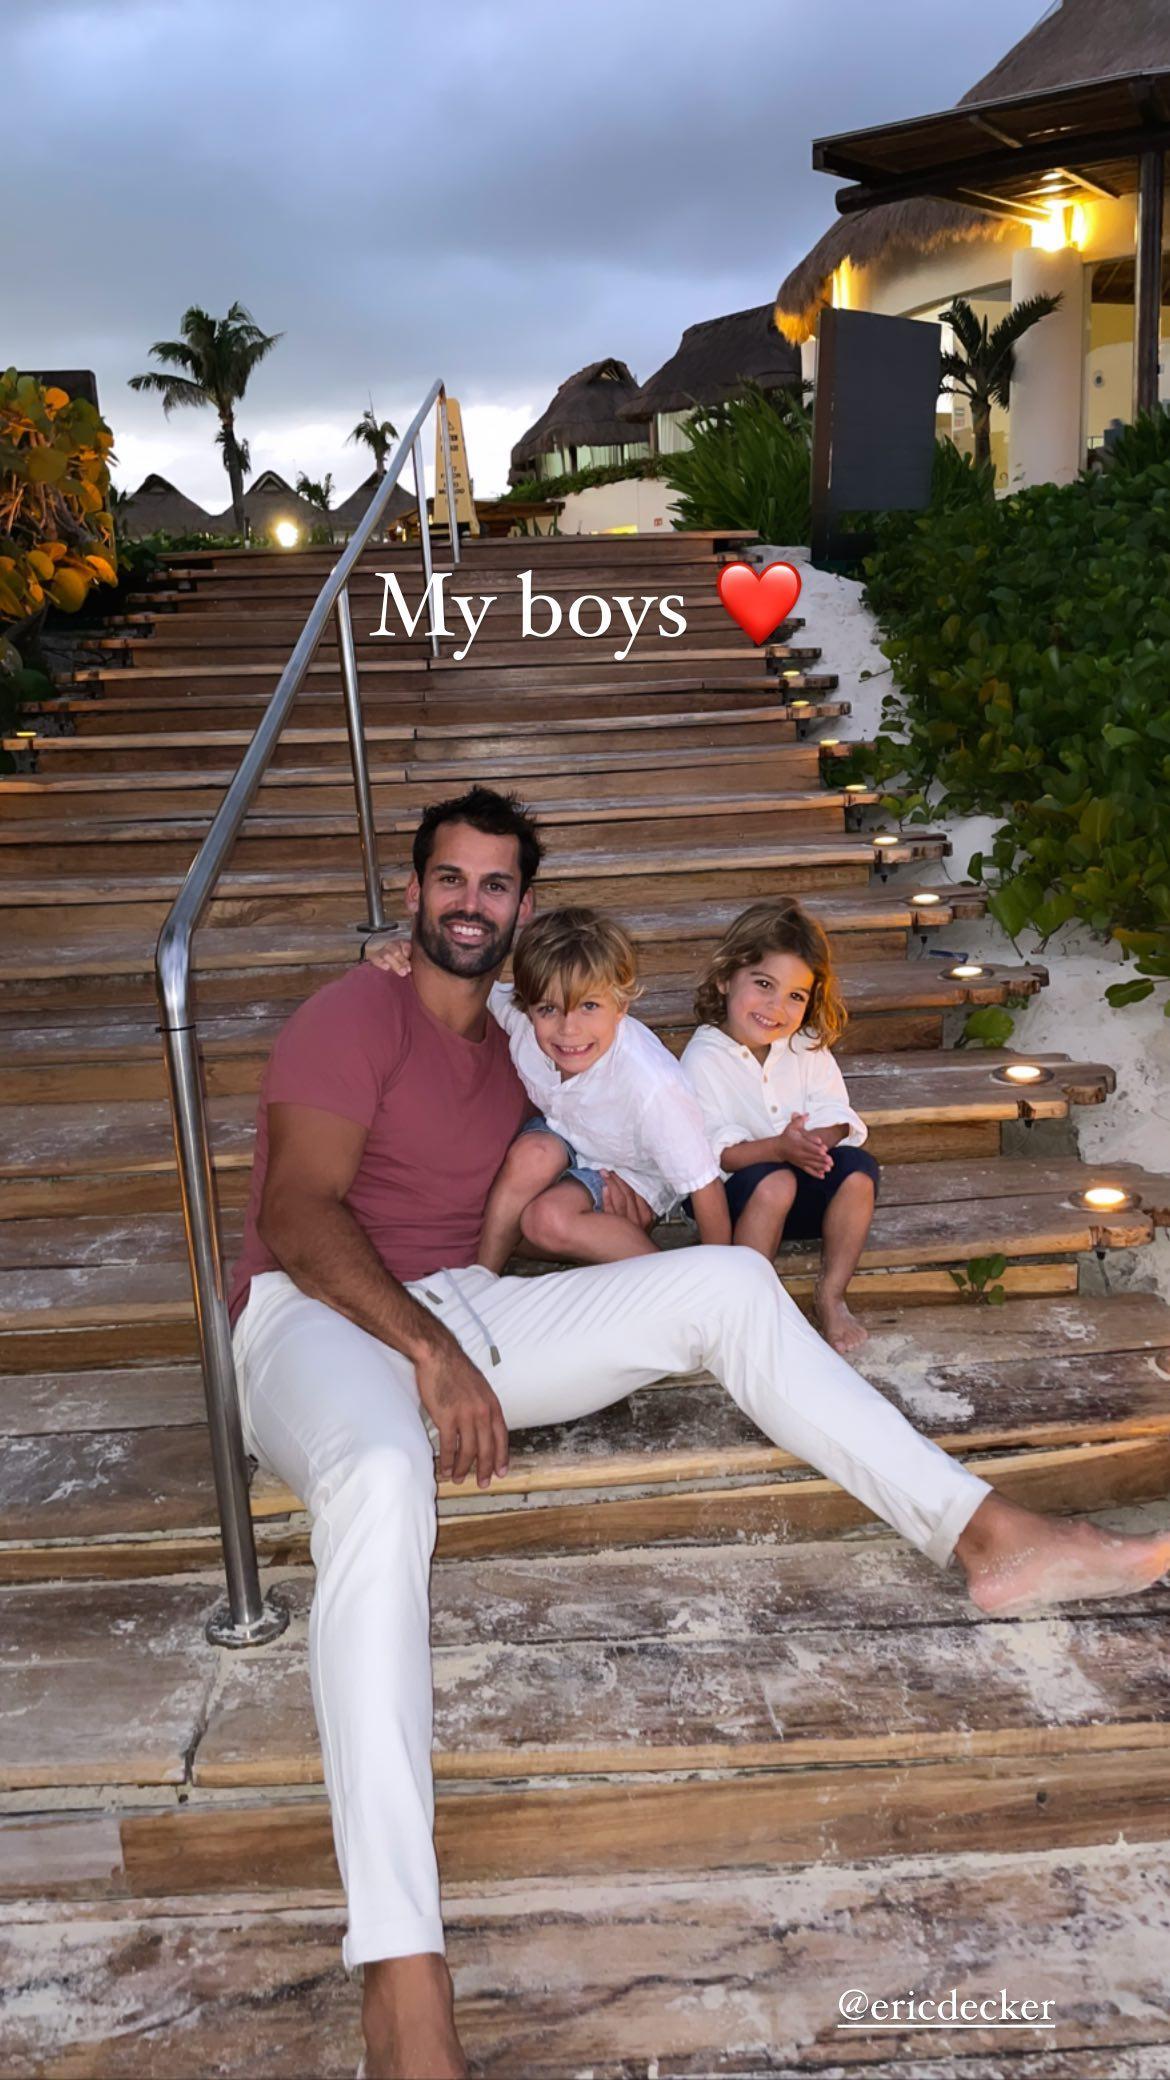 Eric Decker and his sons posing smiling.